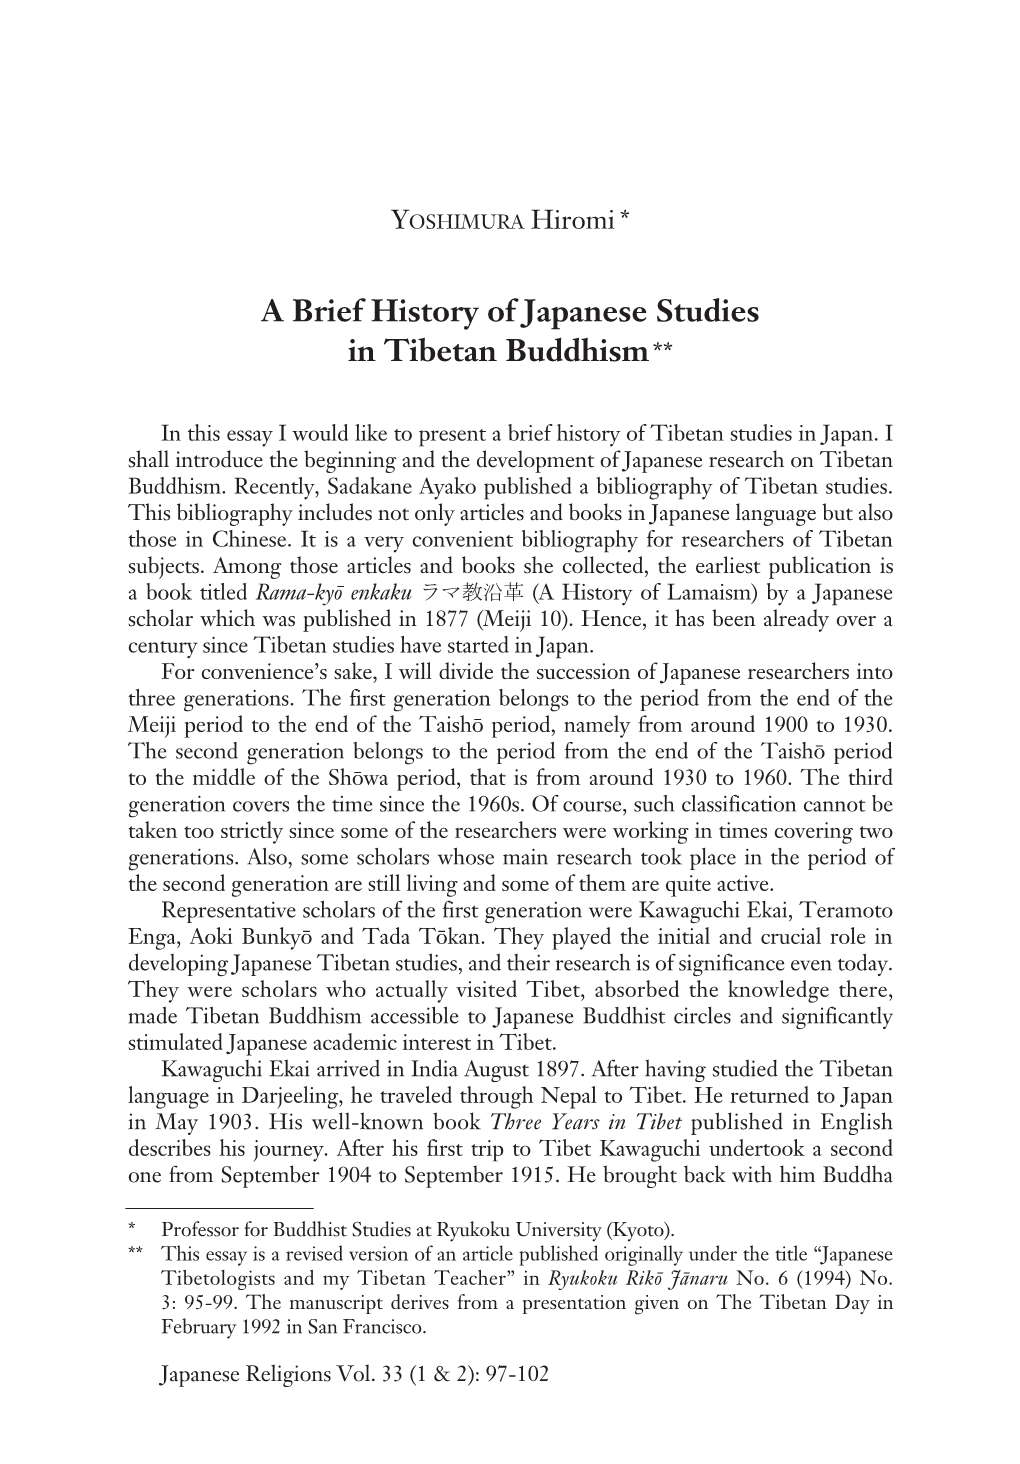 A Brief History of Japanese Studies in Tibetan Buddhism**